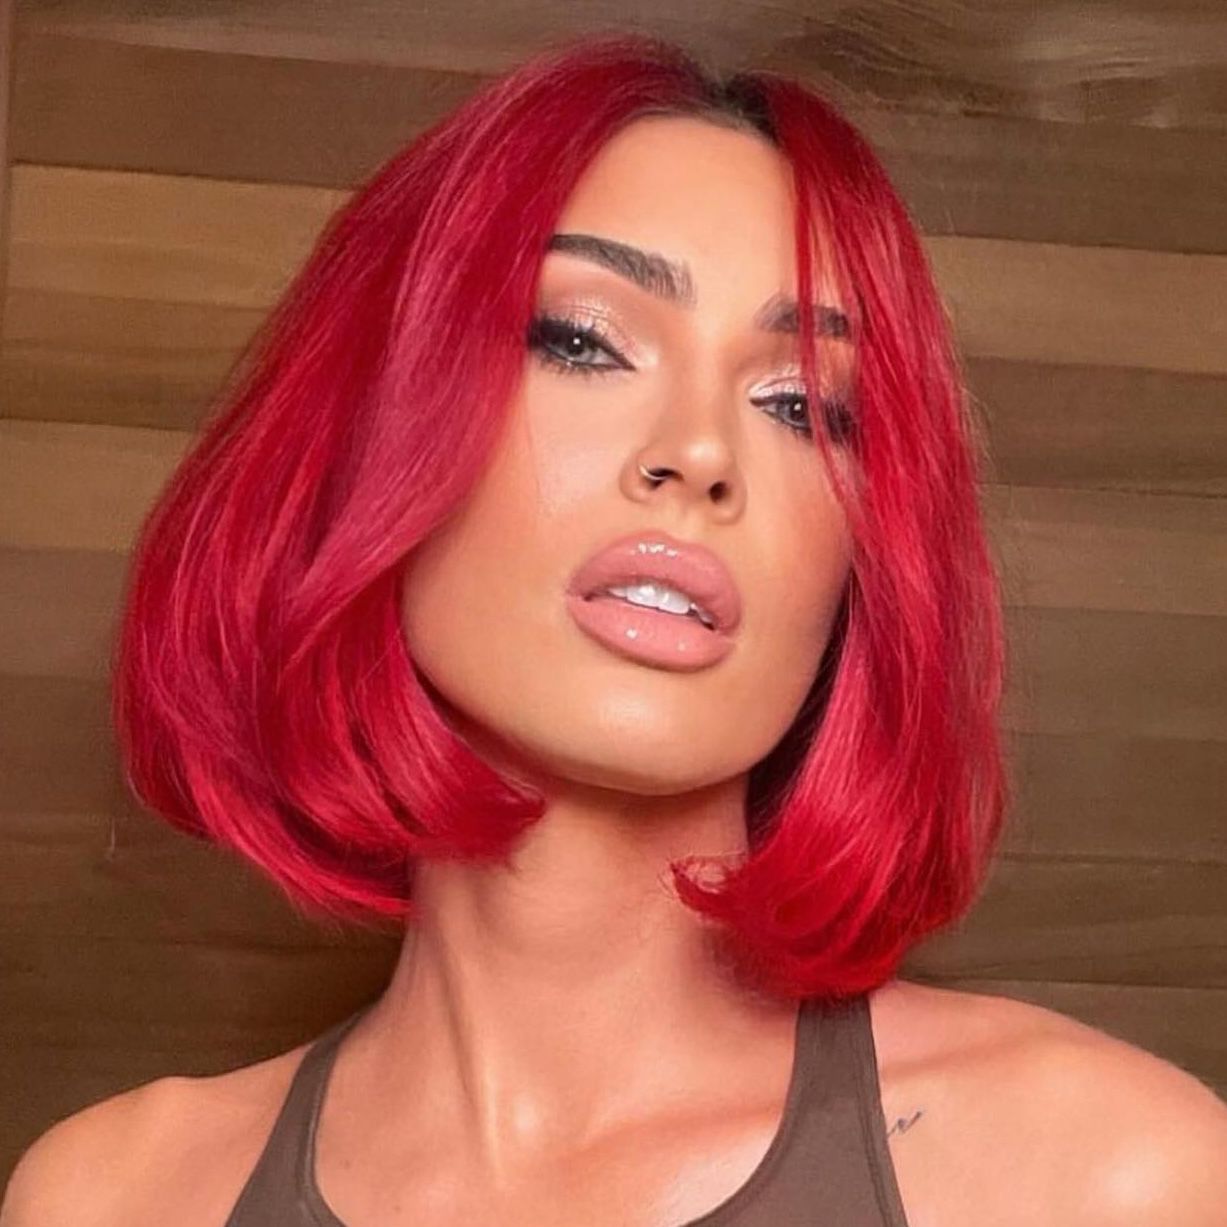 Megan Fox wears a vibrant red bob and pink soft glam makeup look